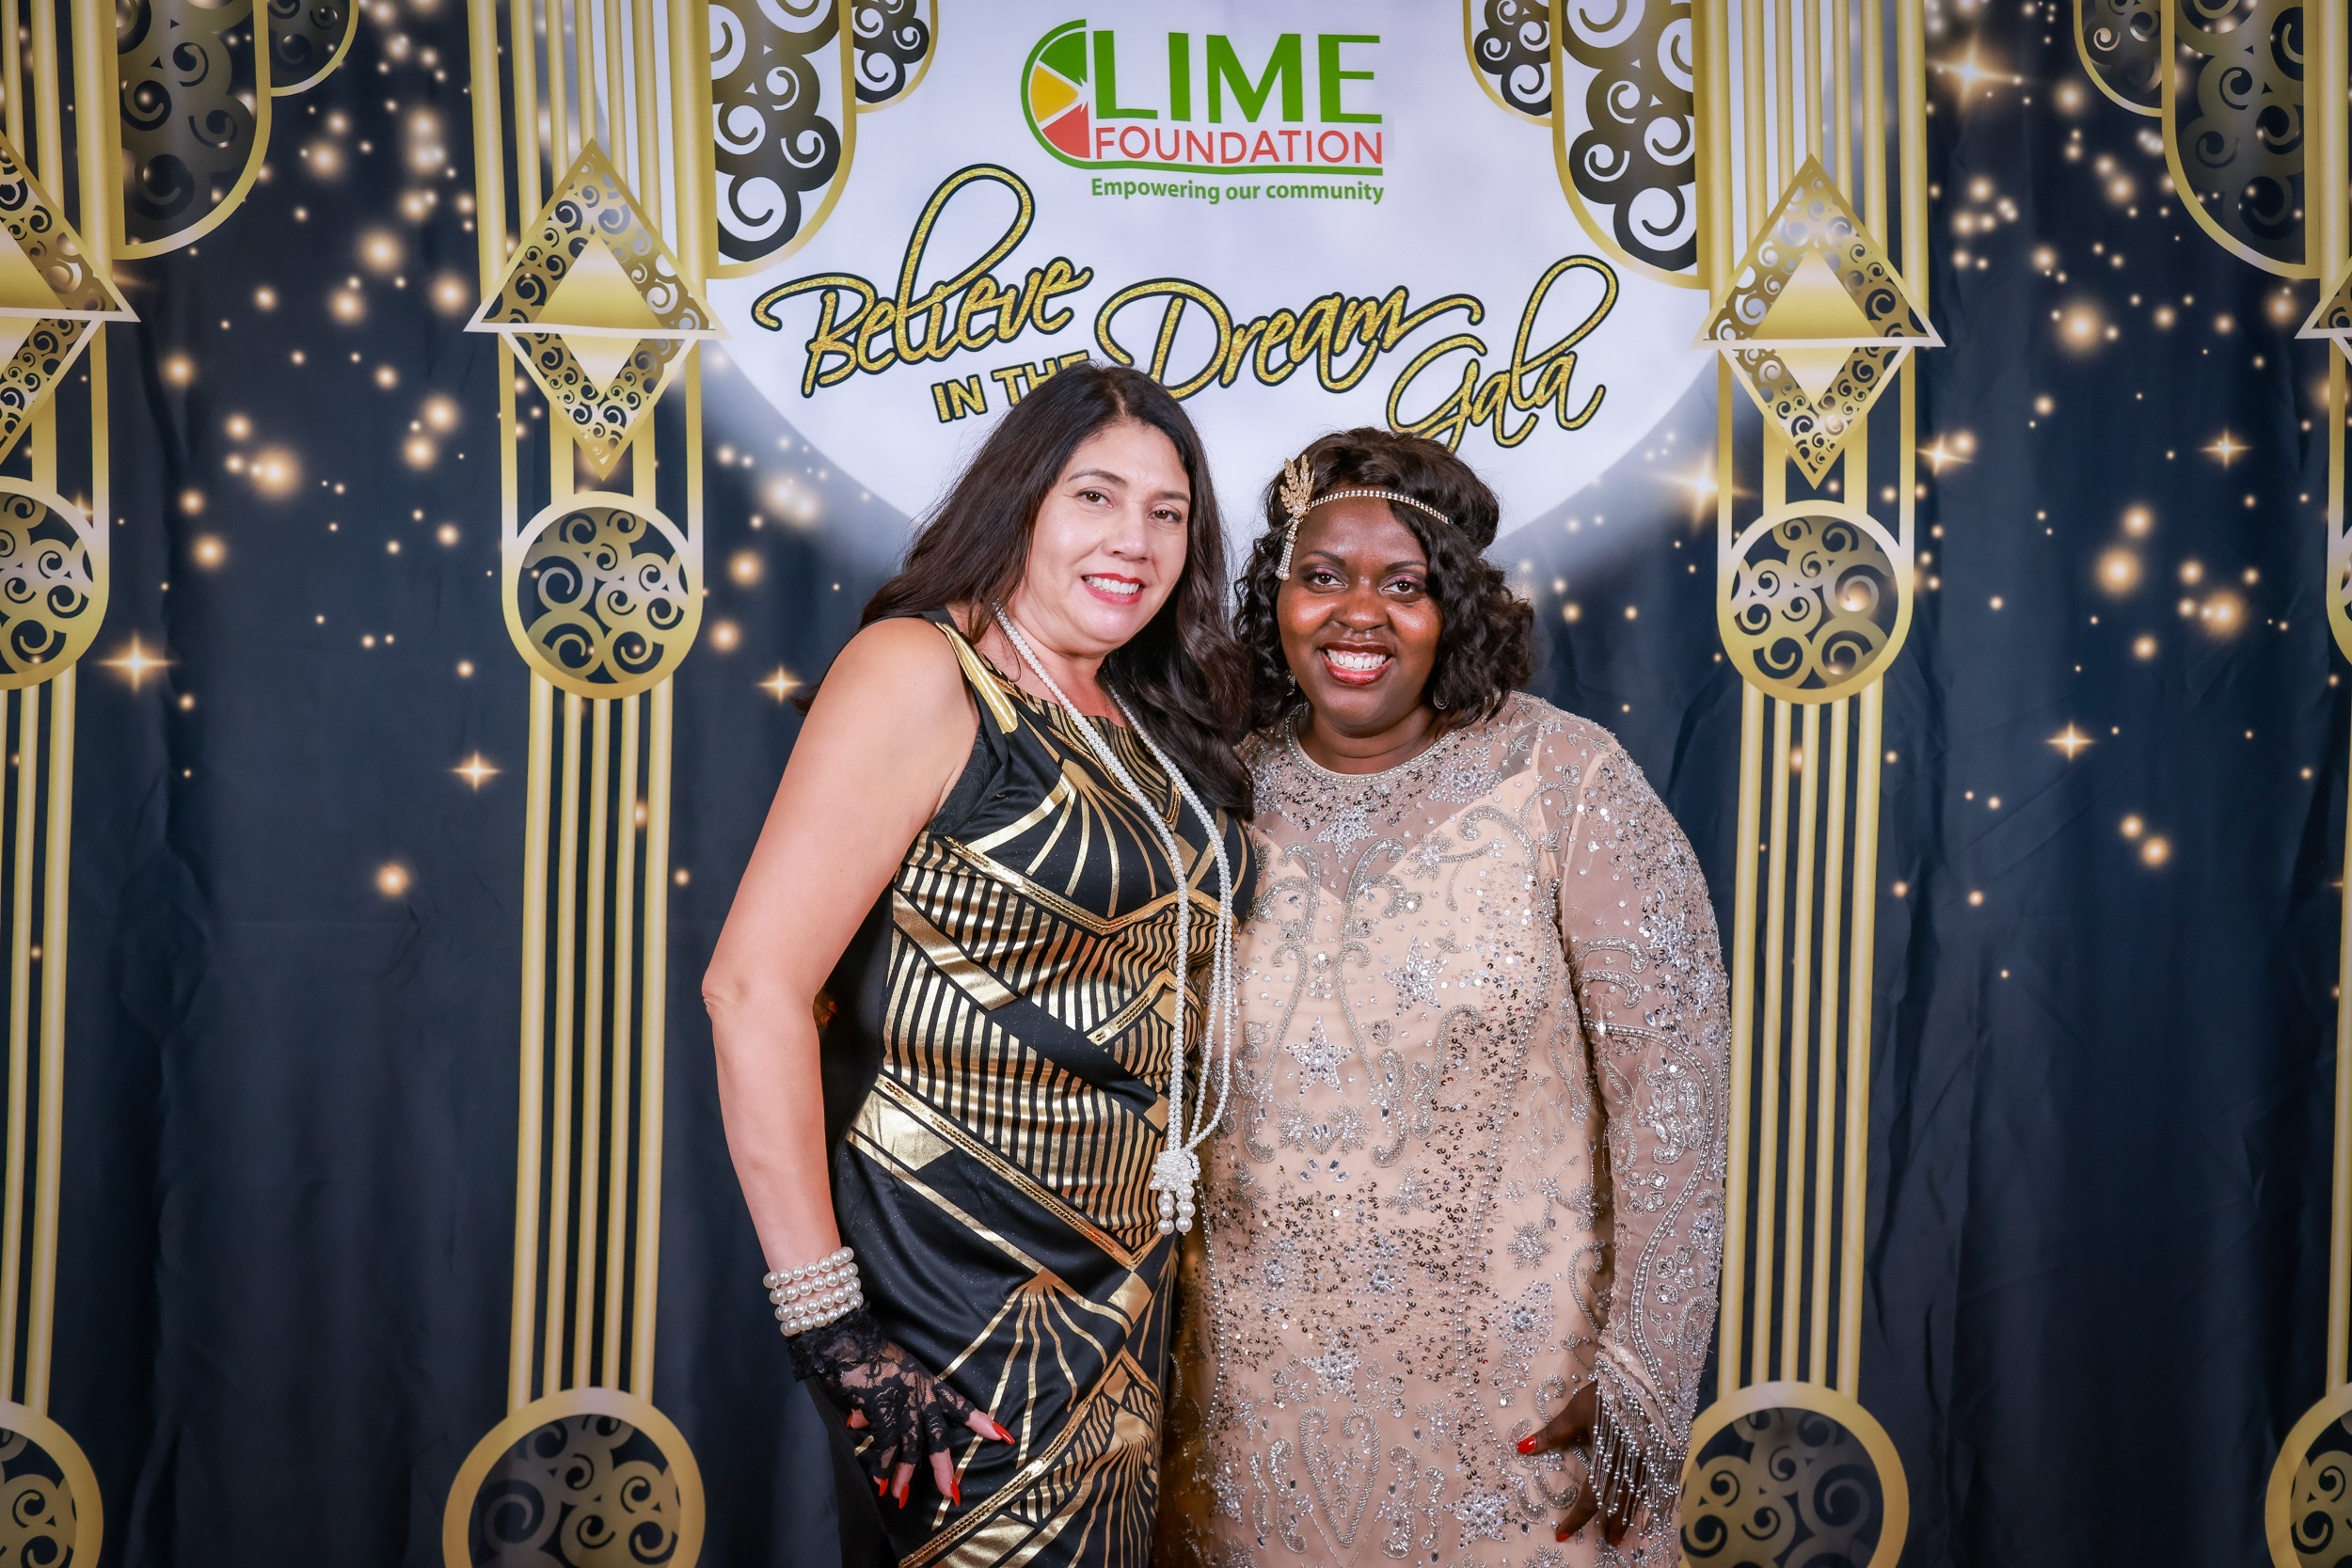 Two women posing for a photo at an event hosted by The LIME Foundation of Santa Rosa.